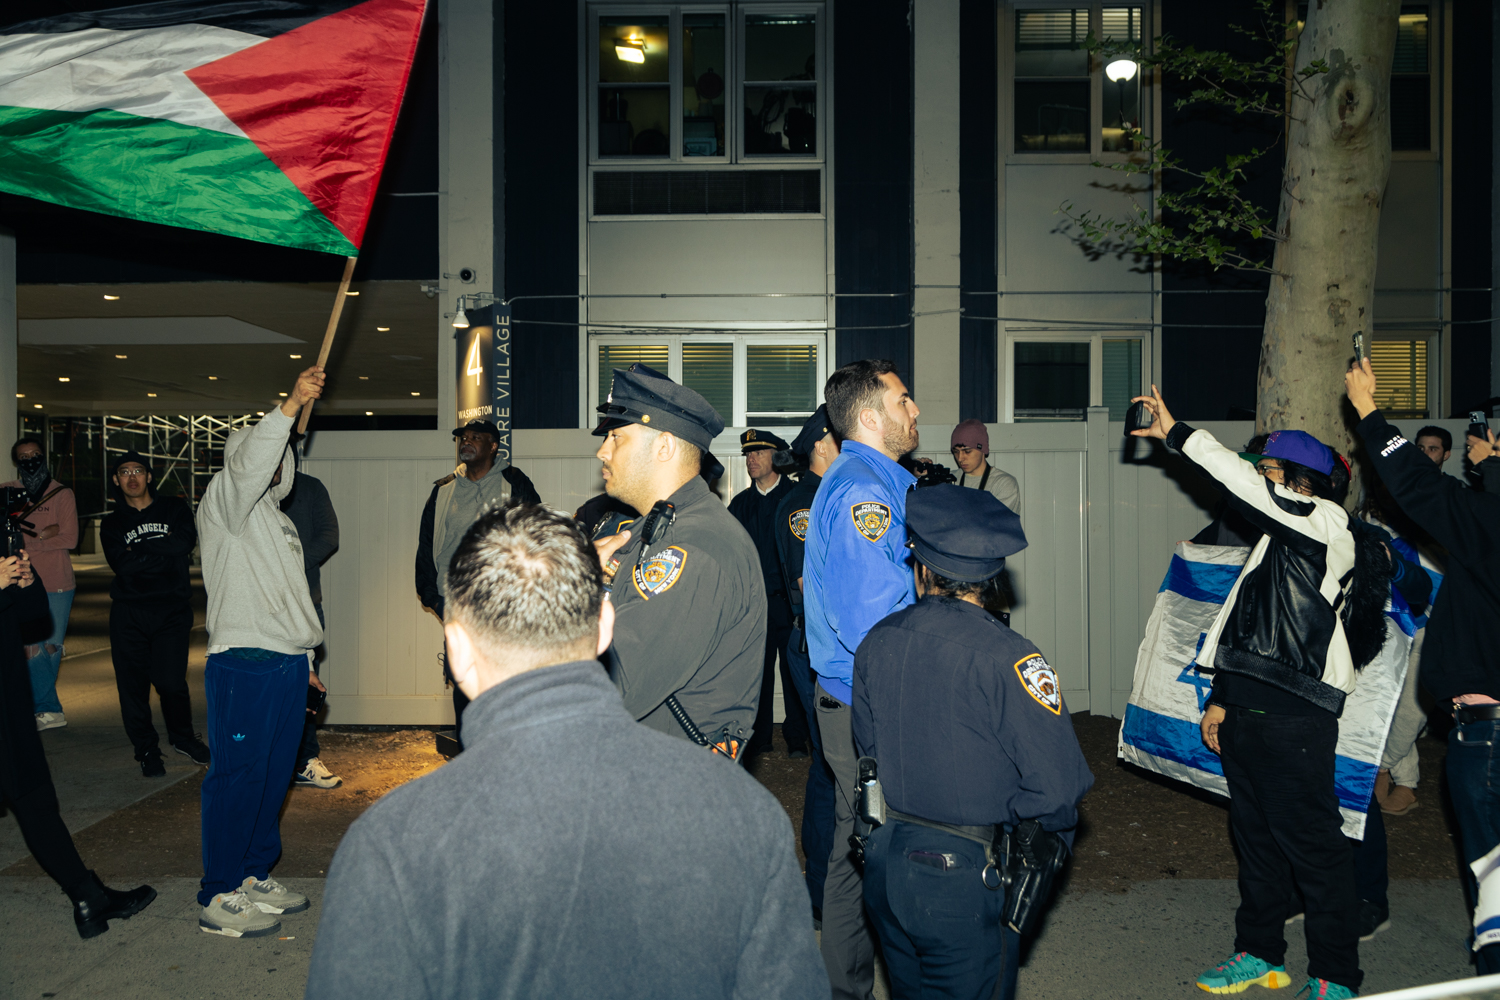 A line of N.Y.P.D. officers form a barrier between pro-Israeli and pro-Palestinian protesters across the street from the encampment.